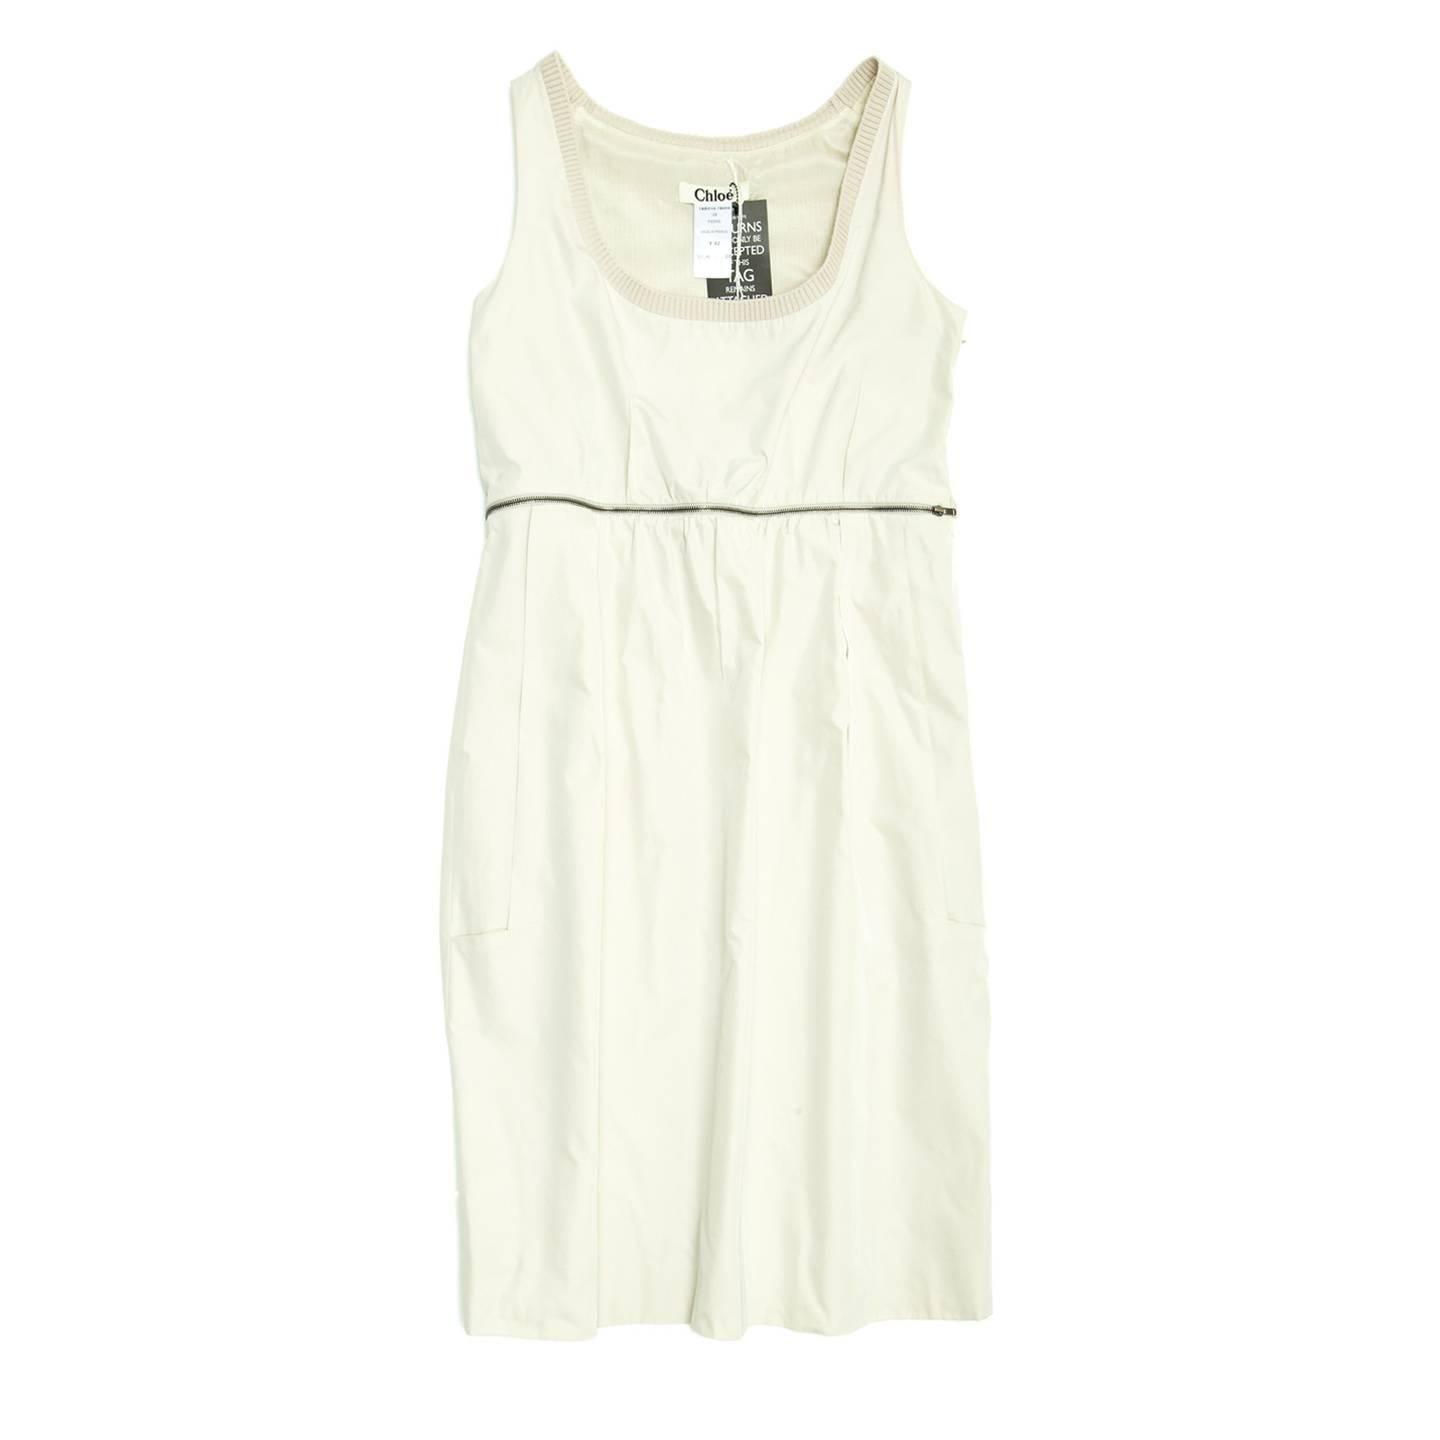 Silk ivory sleeveless dress with silver metal zipper to underline the empire waist line all around the dress. The scooped neckline is embellished with a ribbed border at front and back, at back armholes and the back top panel is made of ribbed knit